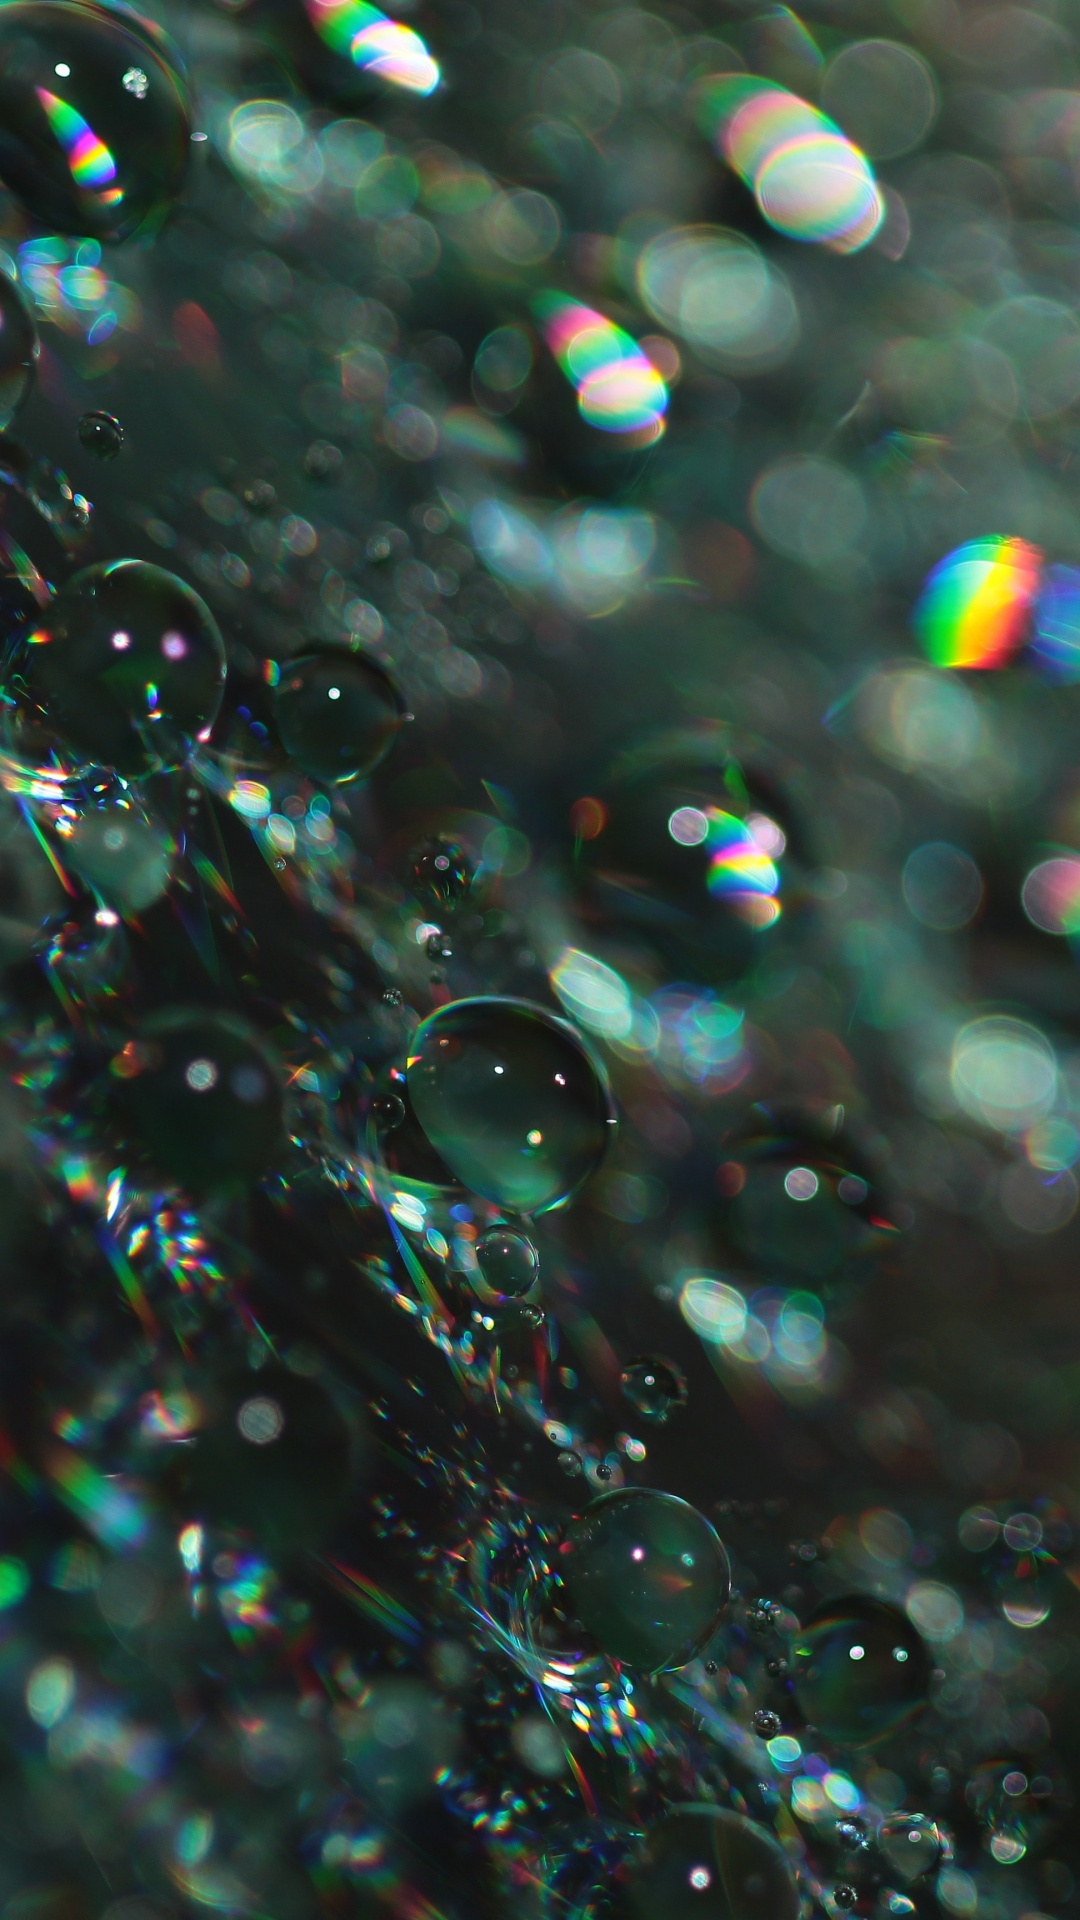 Water Droplets on Glass During Daytime. Wallpaper in 1080x1920 Resolution